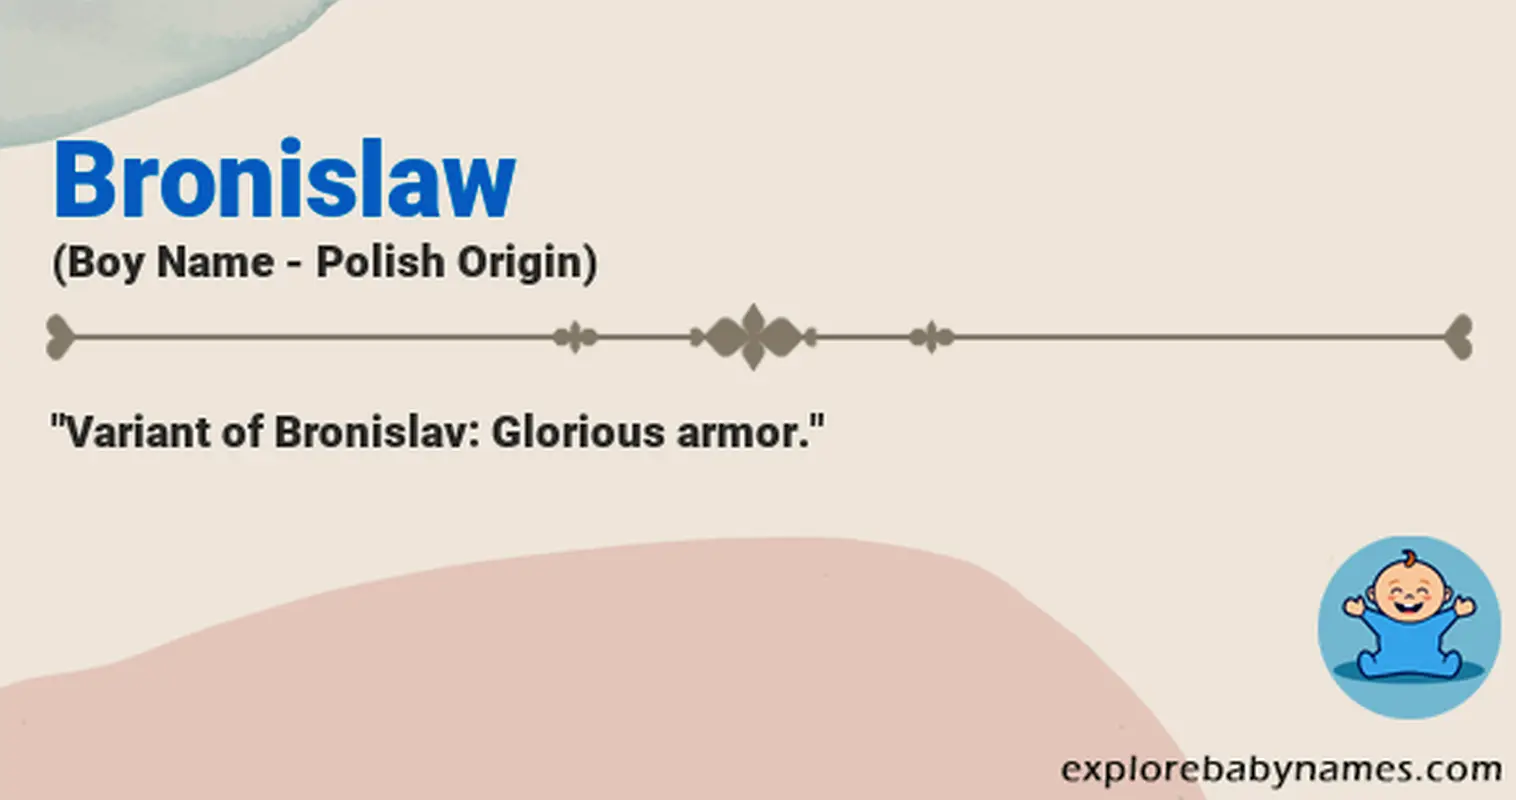 Meaning of Bronislaw